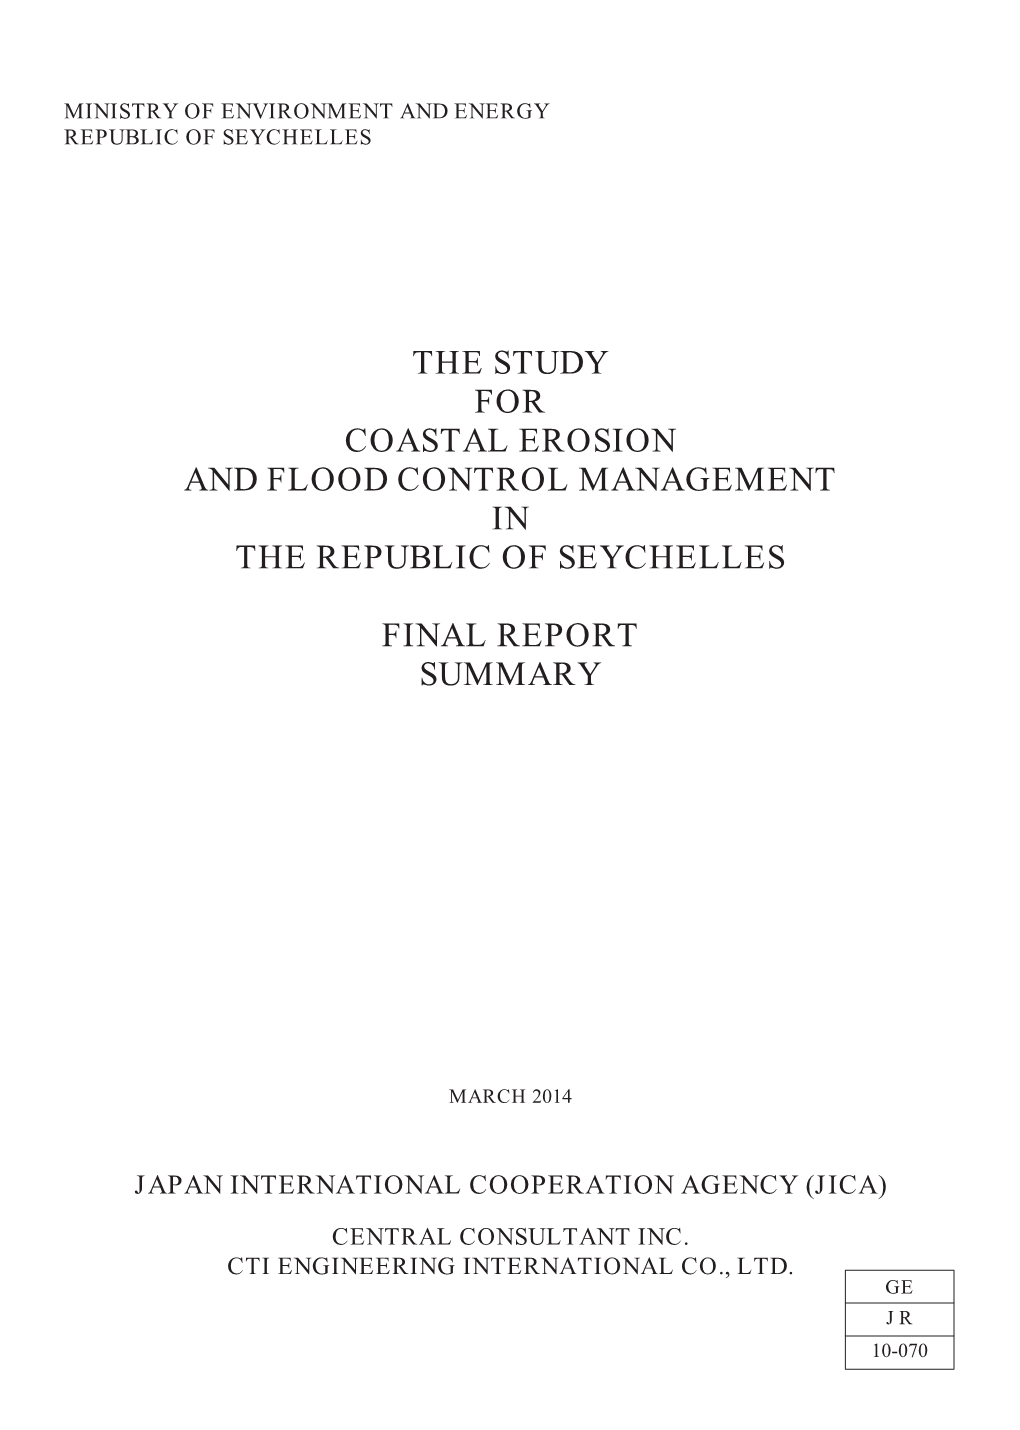 The Study for Coastal Erosion and Flood Control Management in the Republic of Seychelles